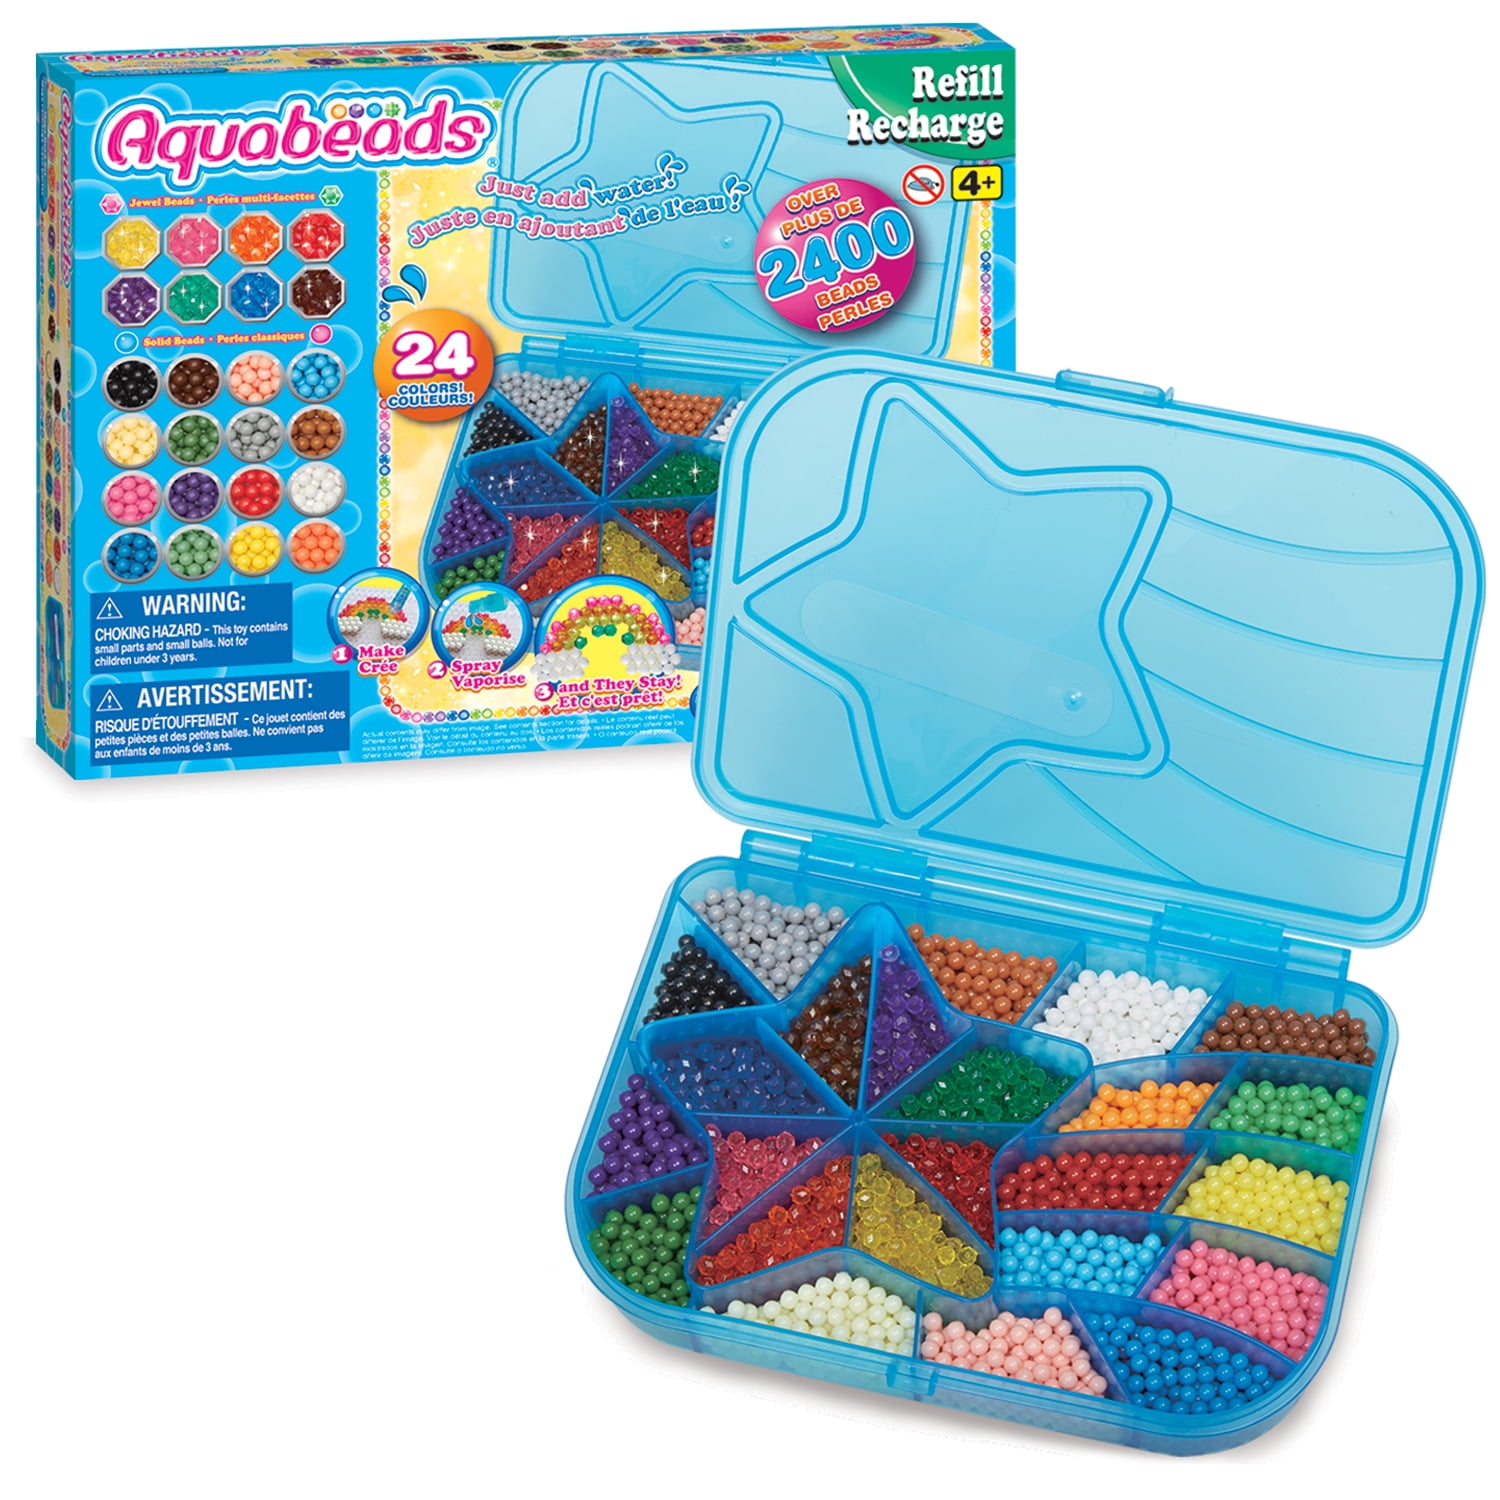 FREE P&P! Aquabeads Jewel & Solid Bead Refill Packs and Playsets 